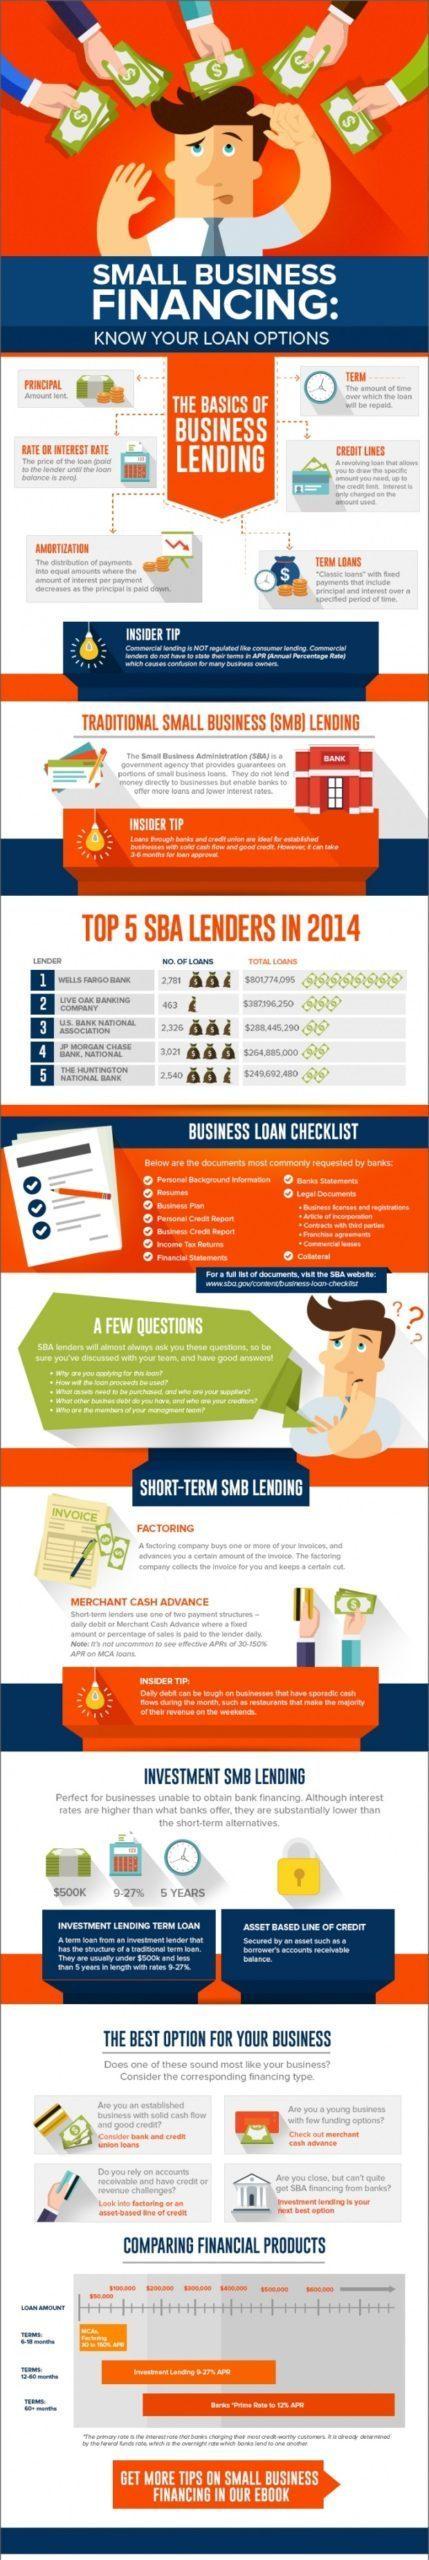 Small Business Financing: Know Your Loan Options [Infographic]